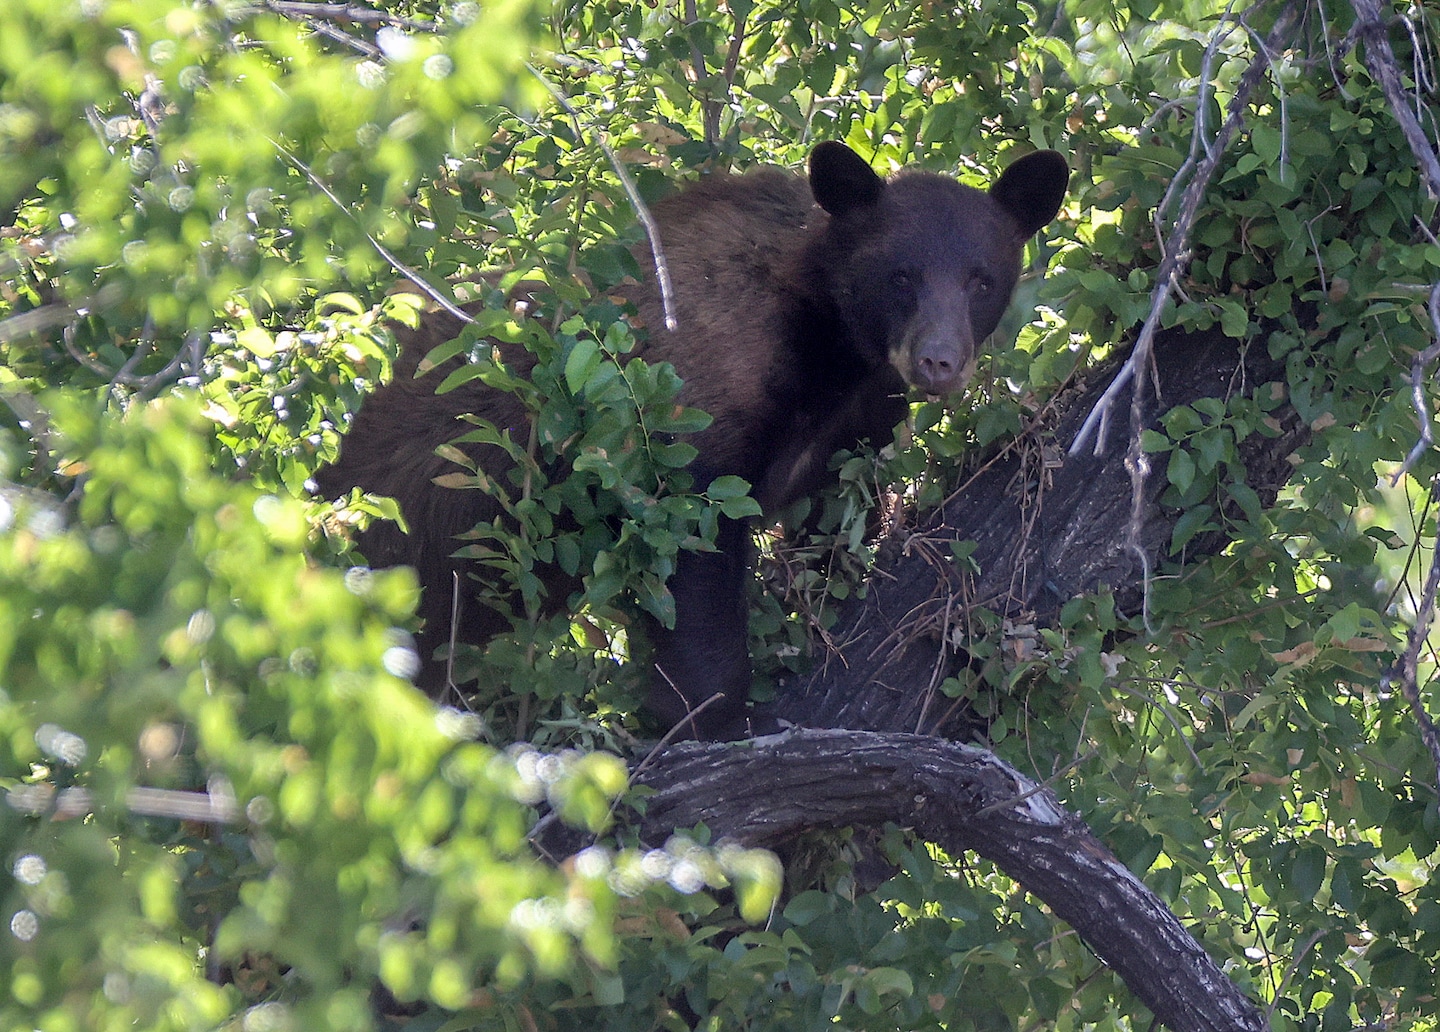 Another black bear spotted in Arlington